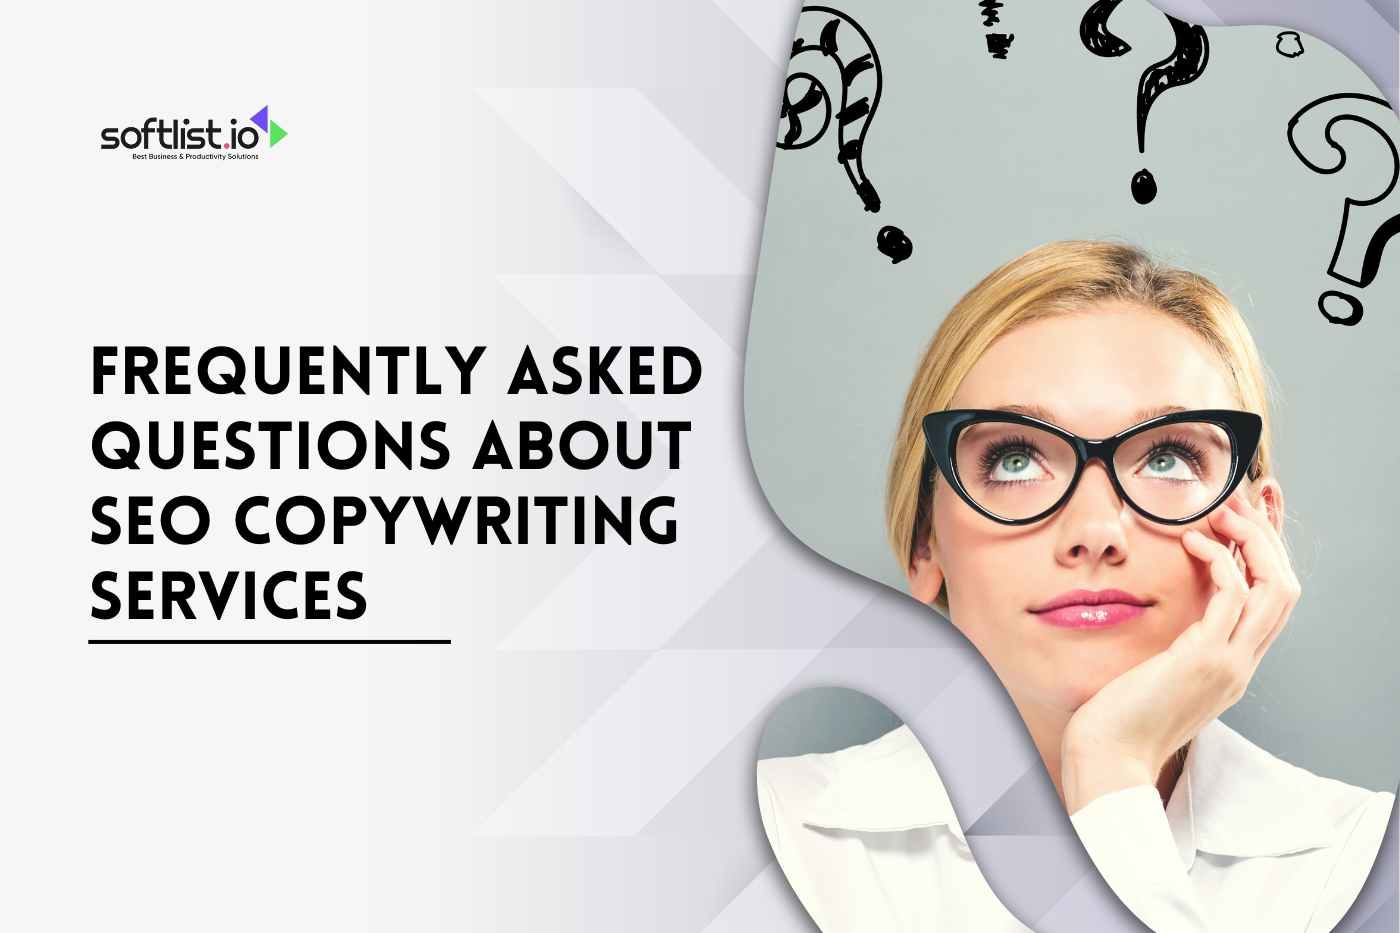 Frequently Asked Questions about SEO Copywriting Services